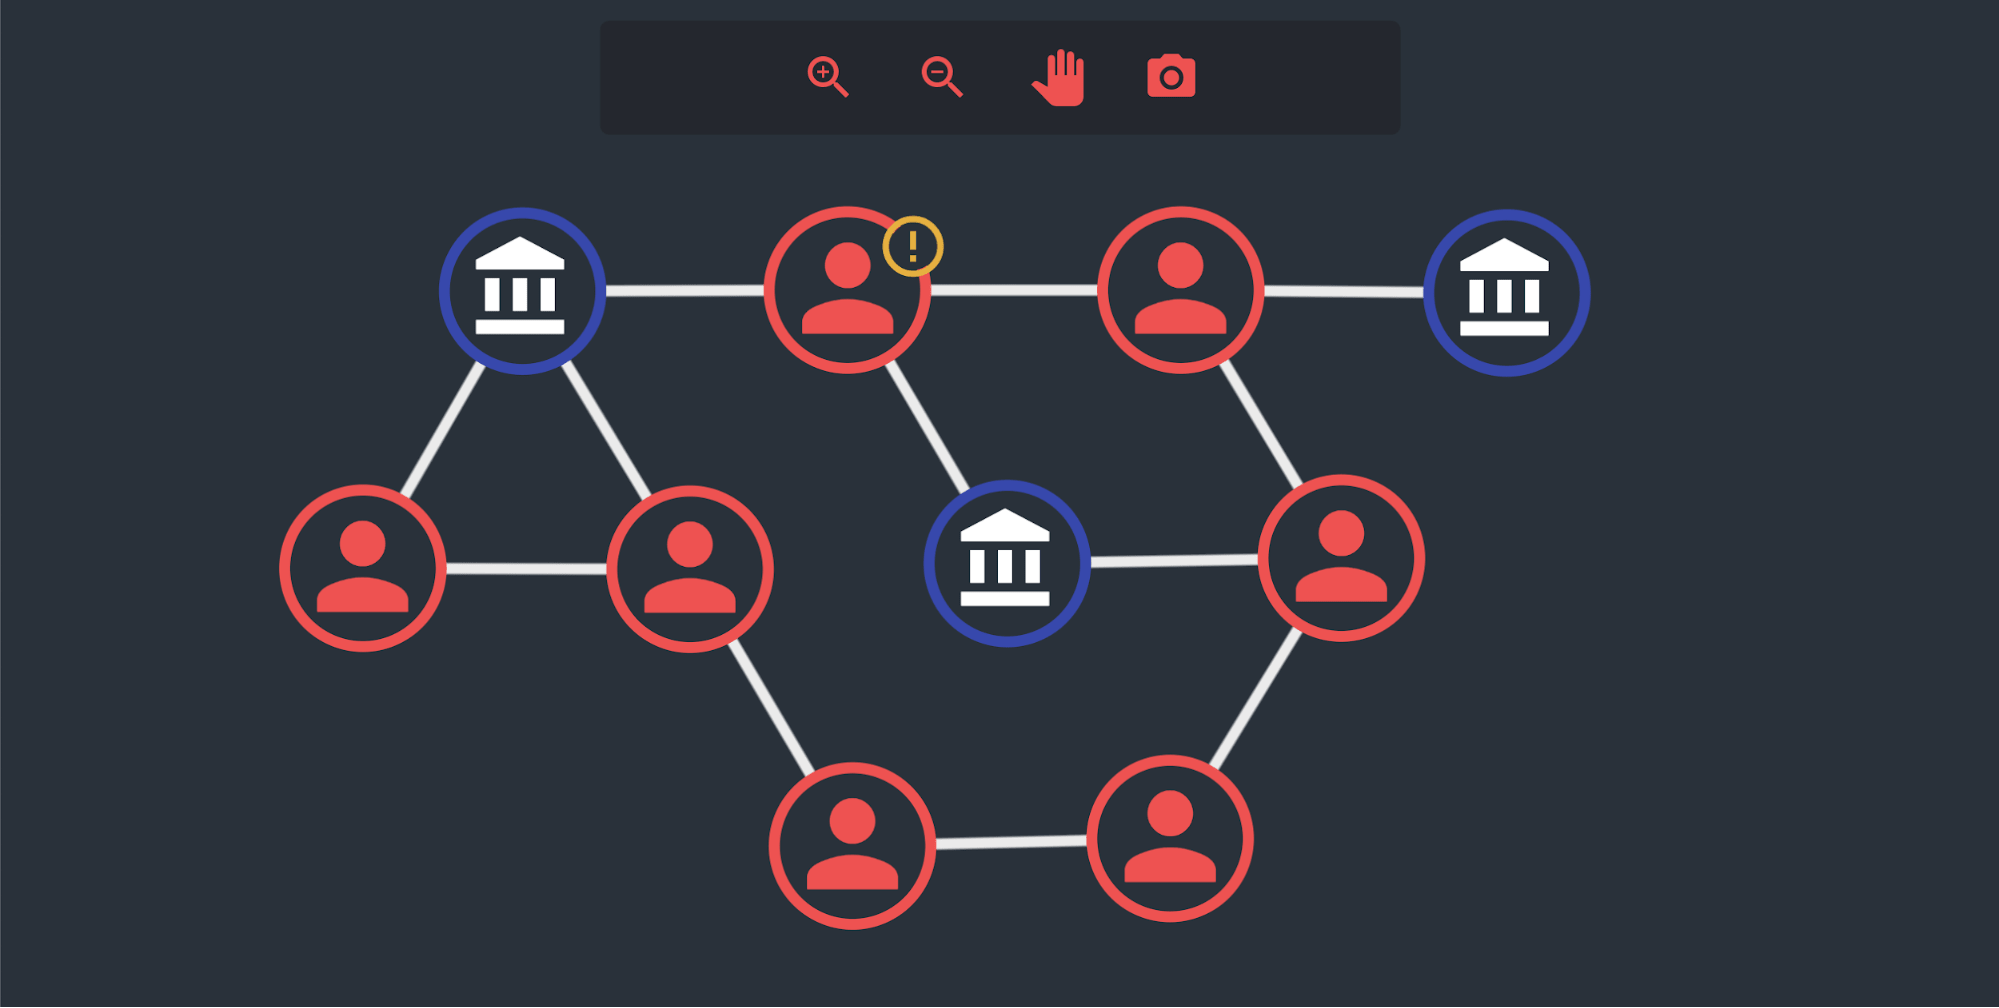 Material UI icons aren’t just for controls. Use them for nodes, glyphs, or any other representations in your graph visualization application.